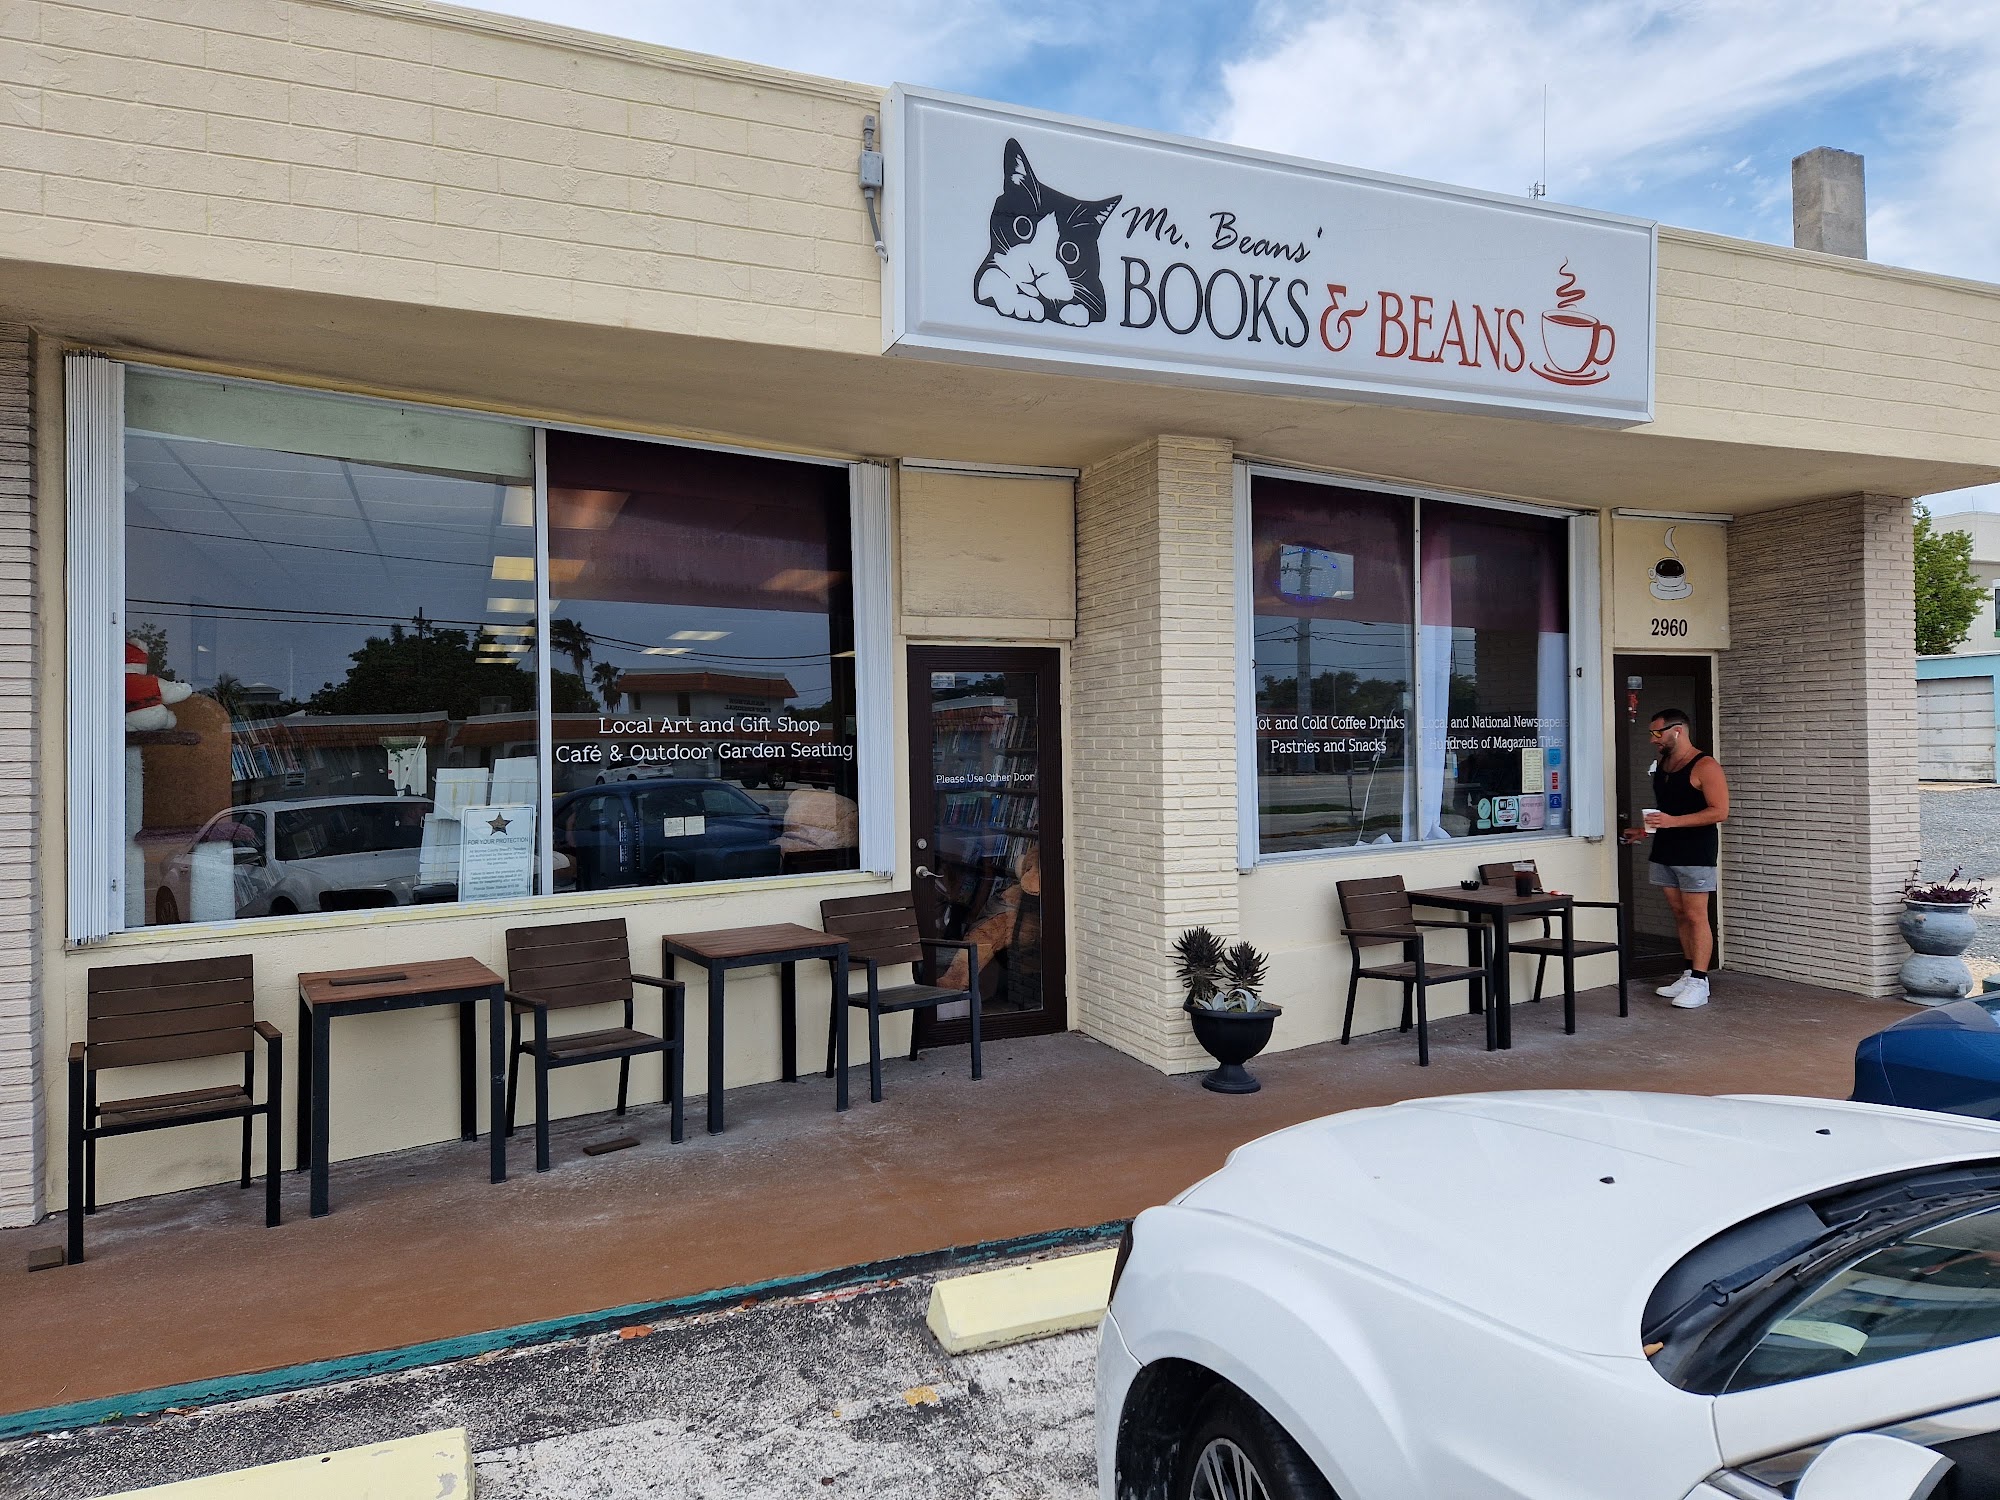 Mr. Beans Books & Beans (formerly Keys News and Coffee)